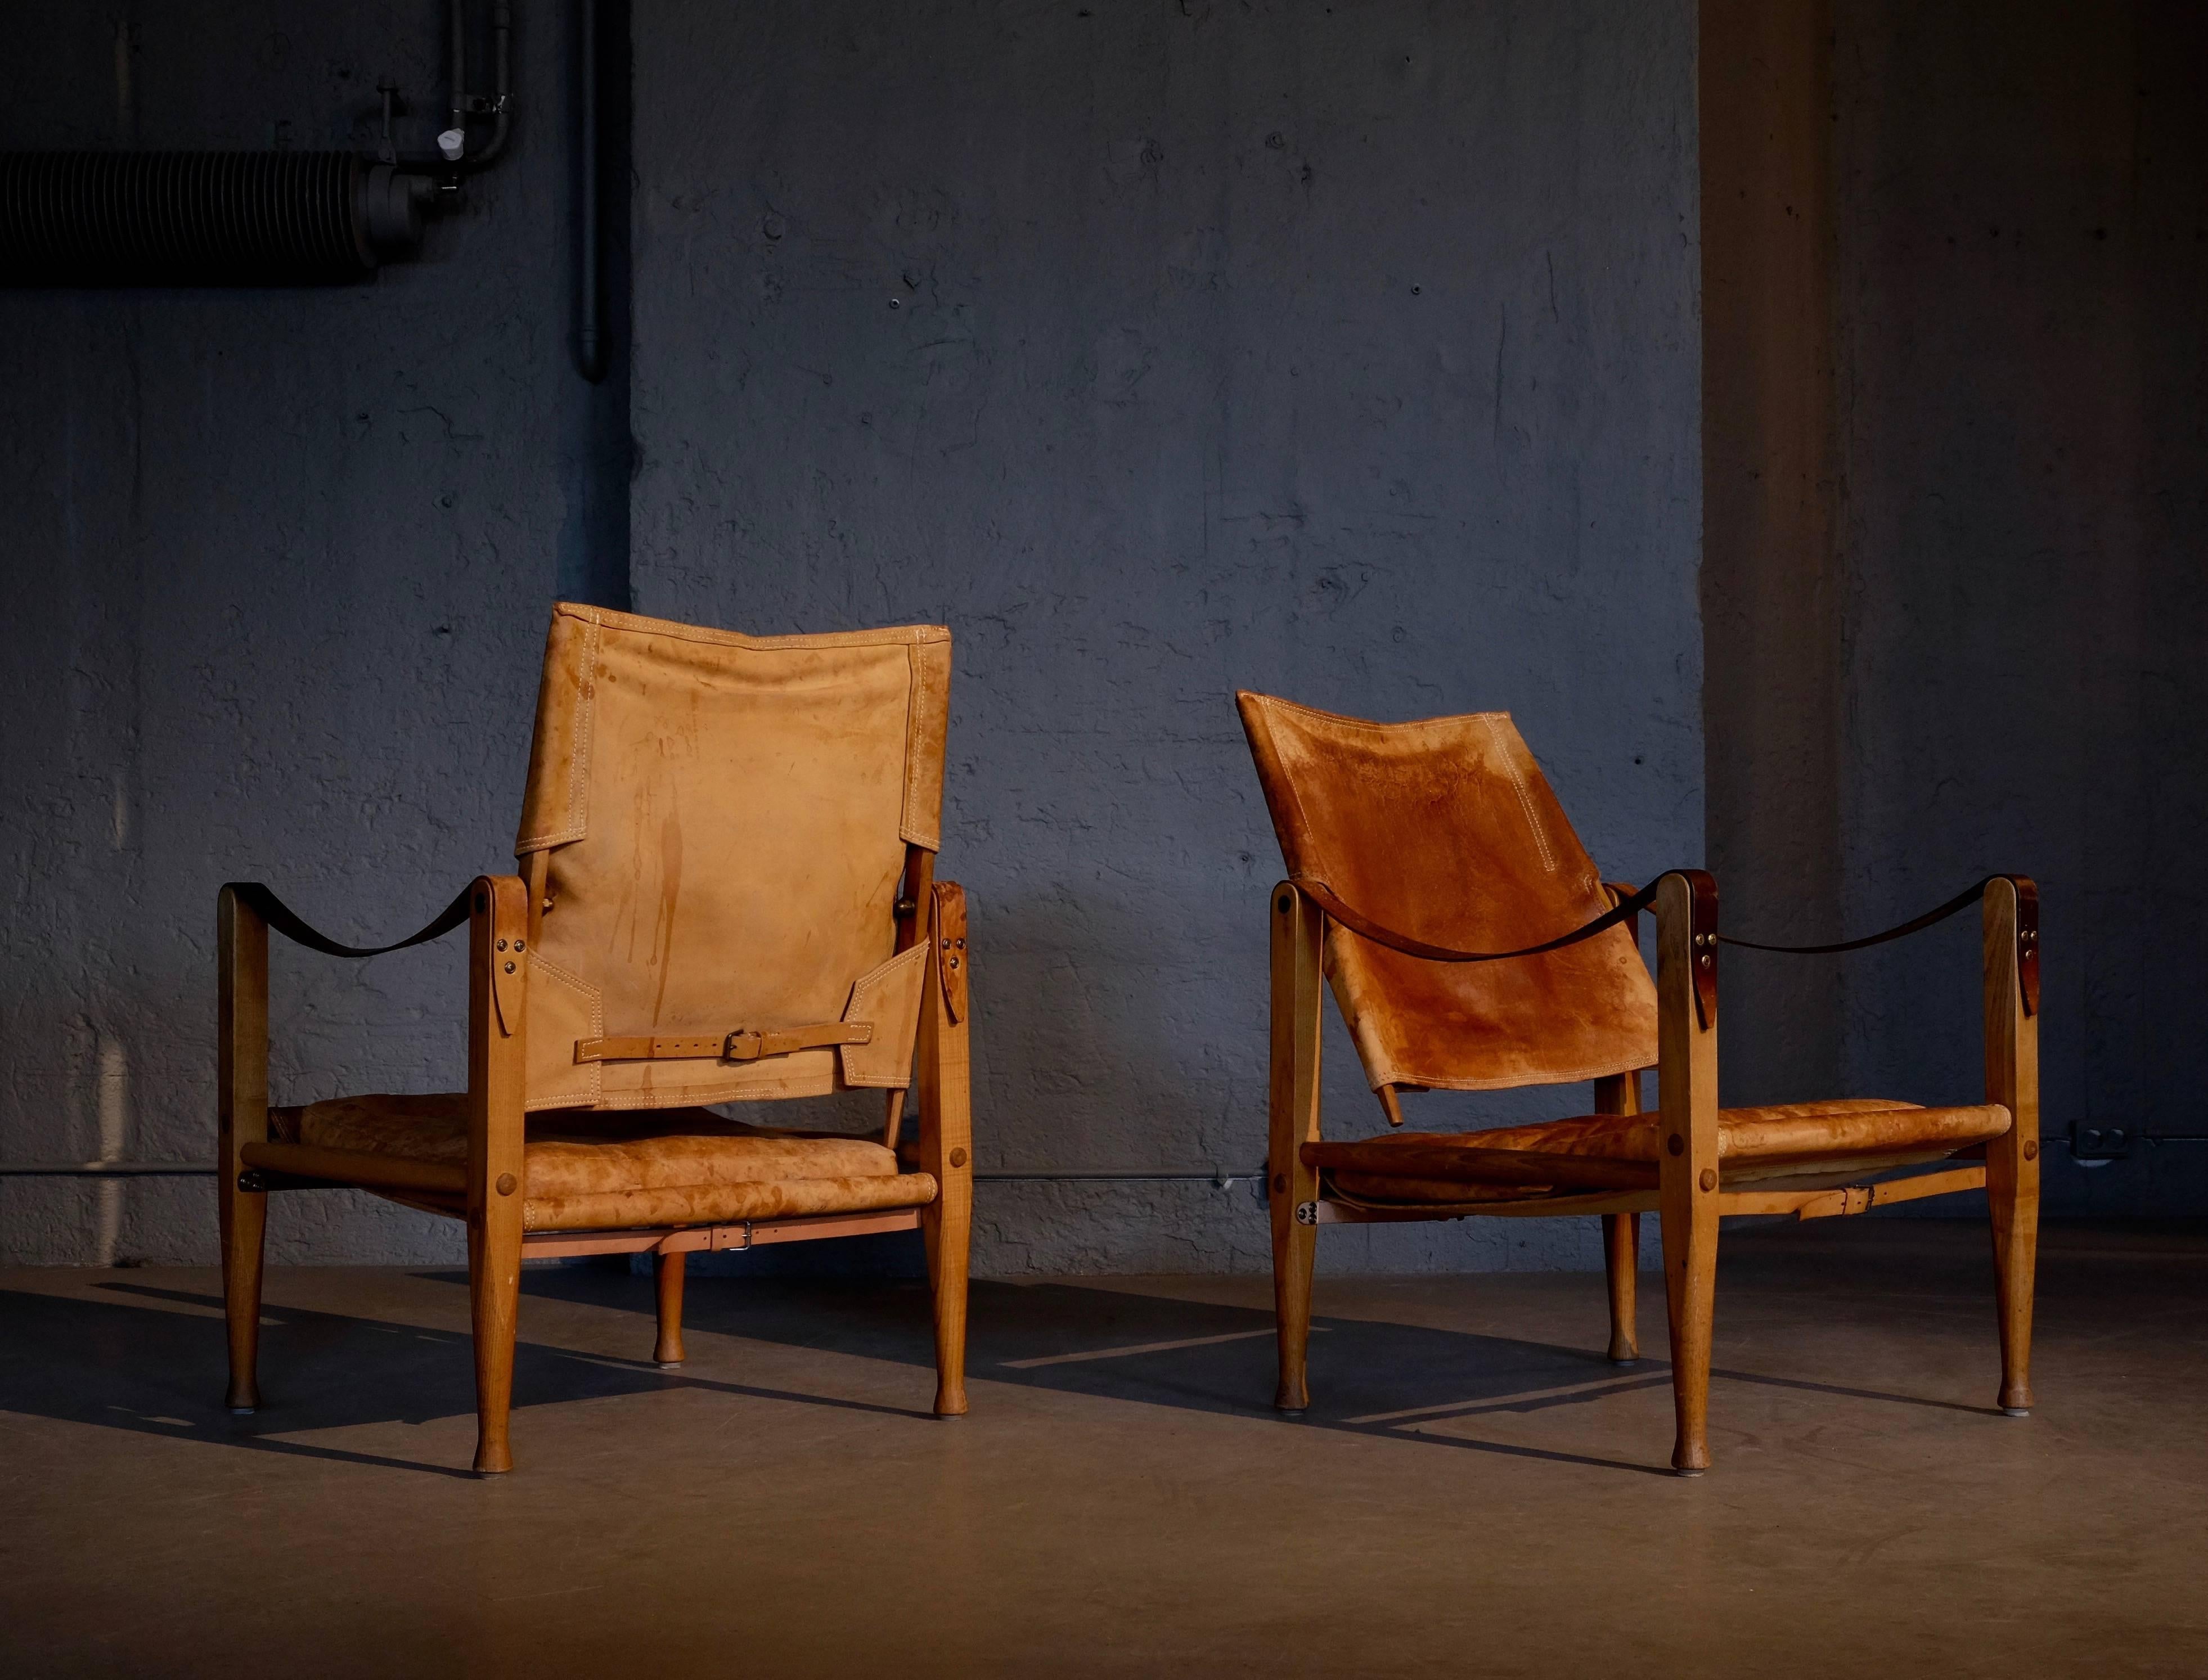 Pair of Safari chairs with patinated cognac brown leather. Designed by Kaare Klint in 1933, produced by Rud. Rasmussen, Denmark.
Please note: the condition of the cushions is not the best, some button missing and a few smaller holes on the sides,